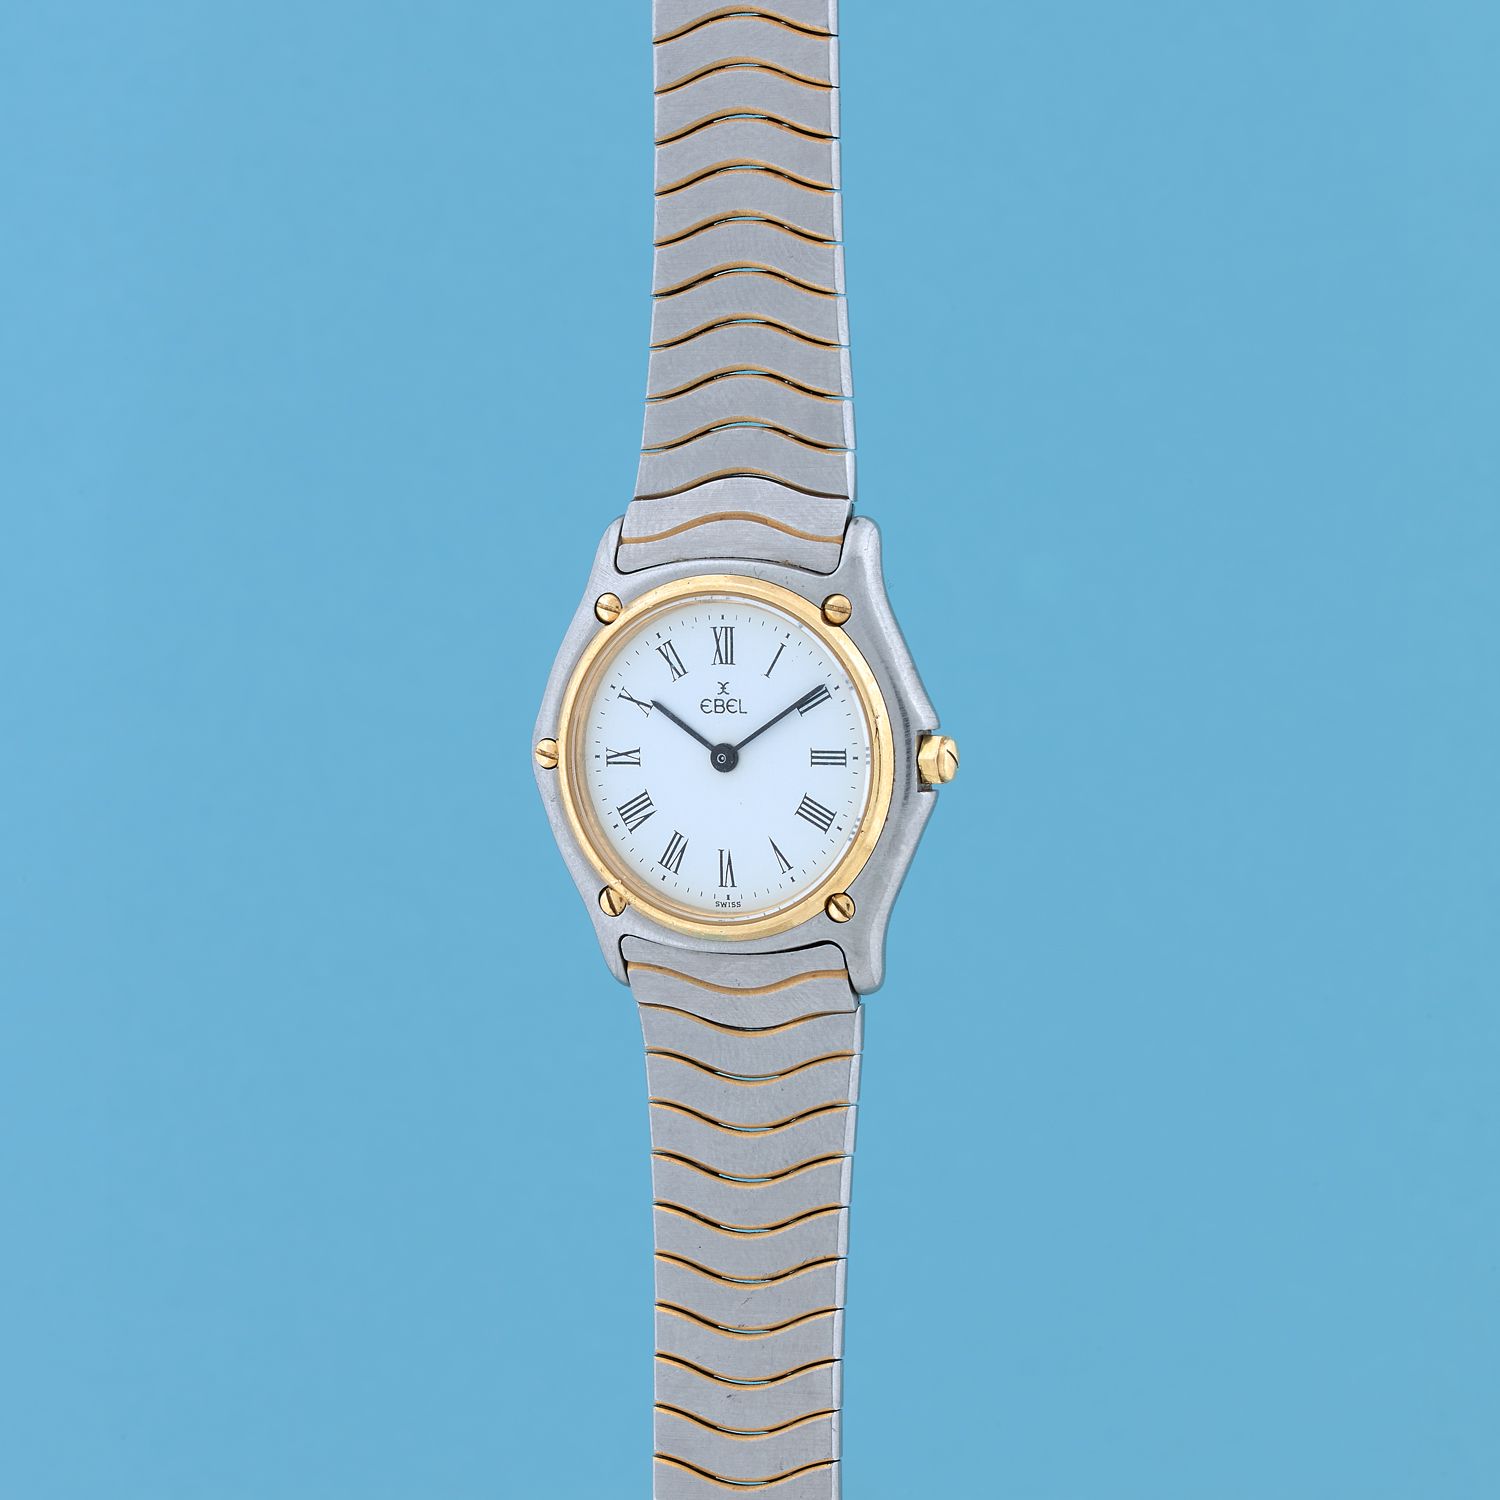 Null EBEL
Lady's watch, in gold and steel. Round case numbered. White dial signe&hellip;